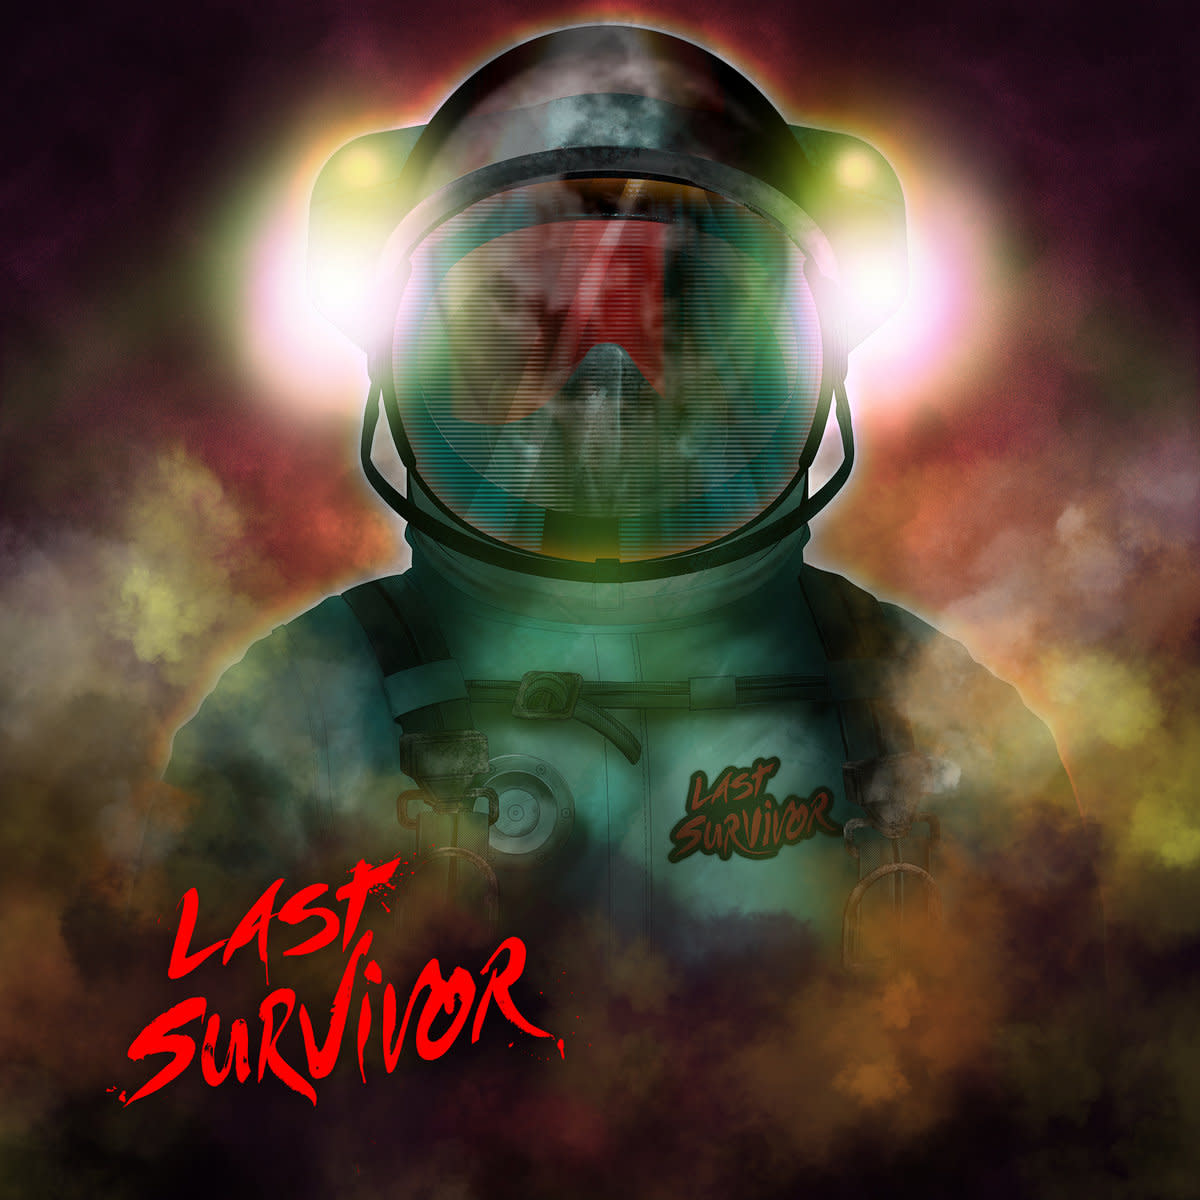 synth-ep-review-staring-at-the-moon-by-last-survivor